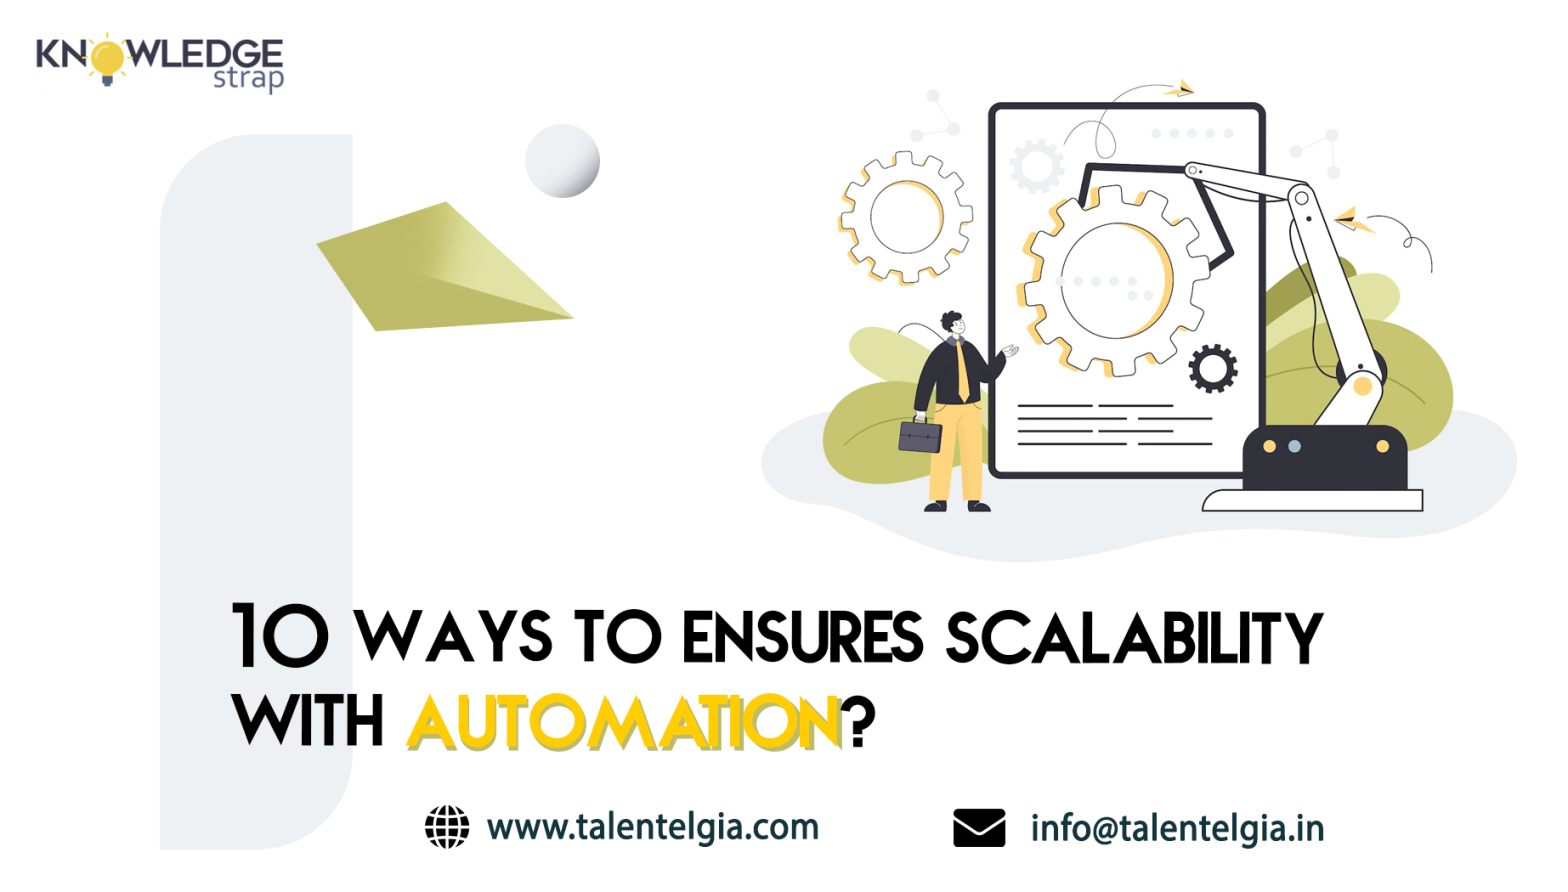 10 Ways Automation Can Help You Scale Your Business